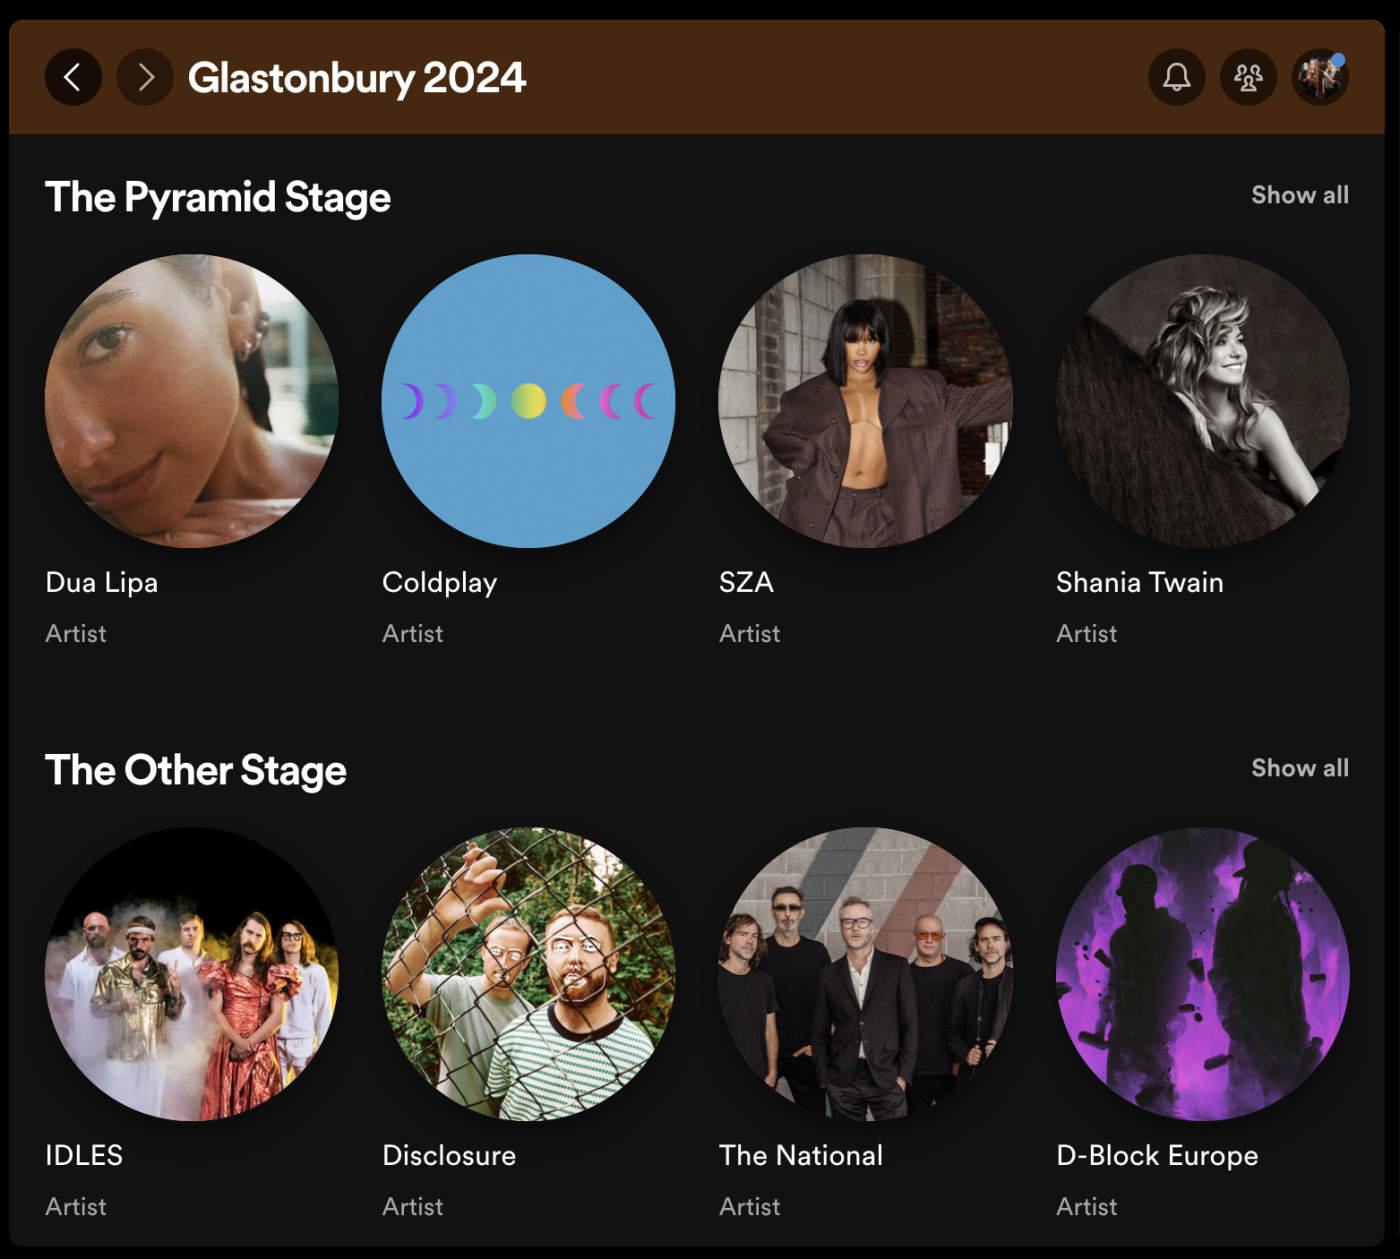 Spotify will help you curate a personalised Glastonbury lineup